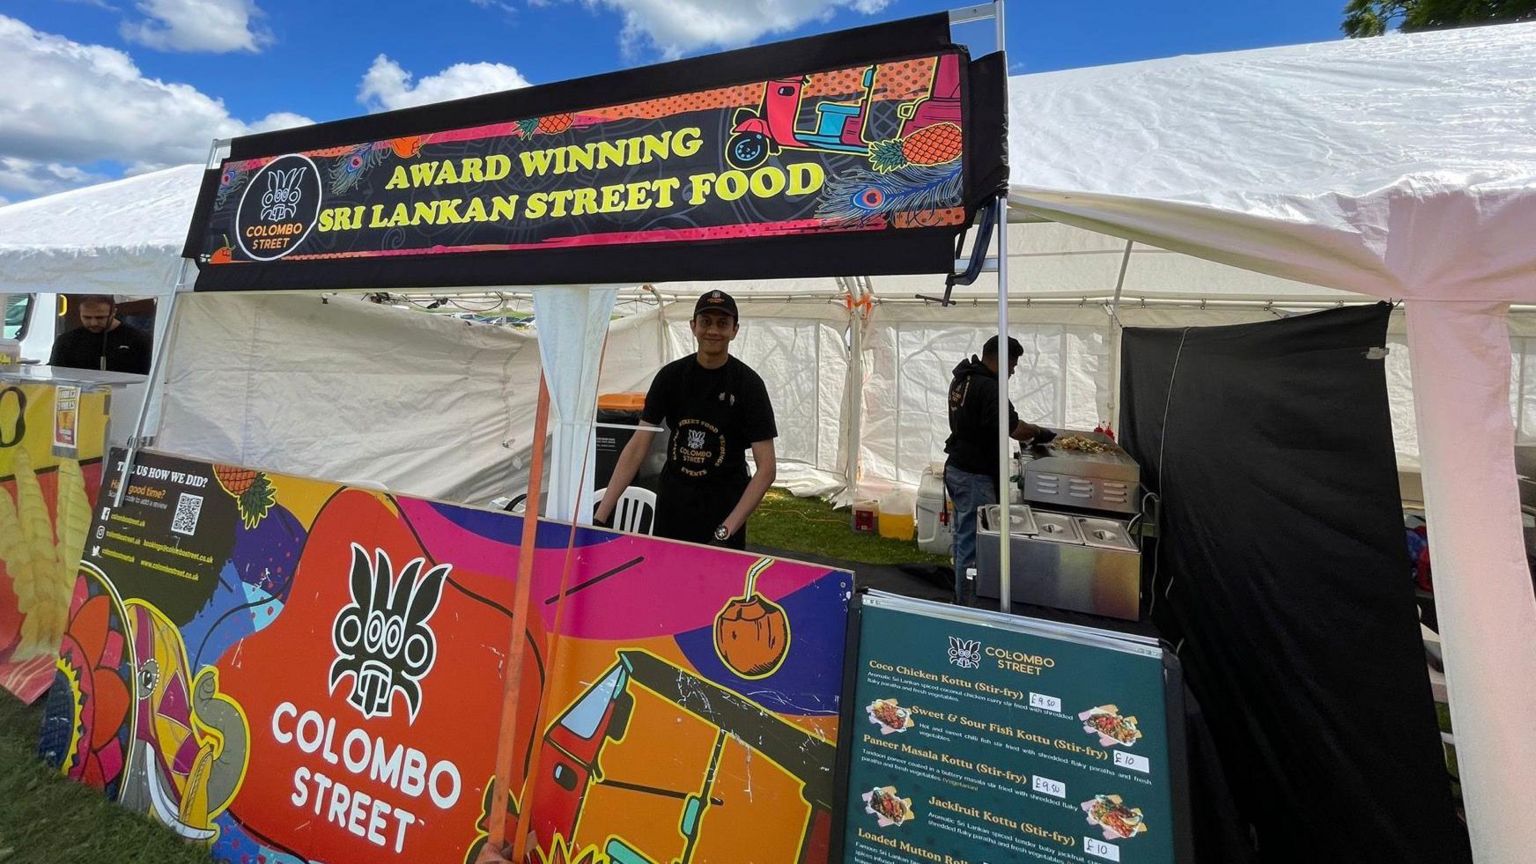 A food stand at the festival